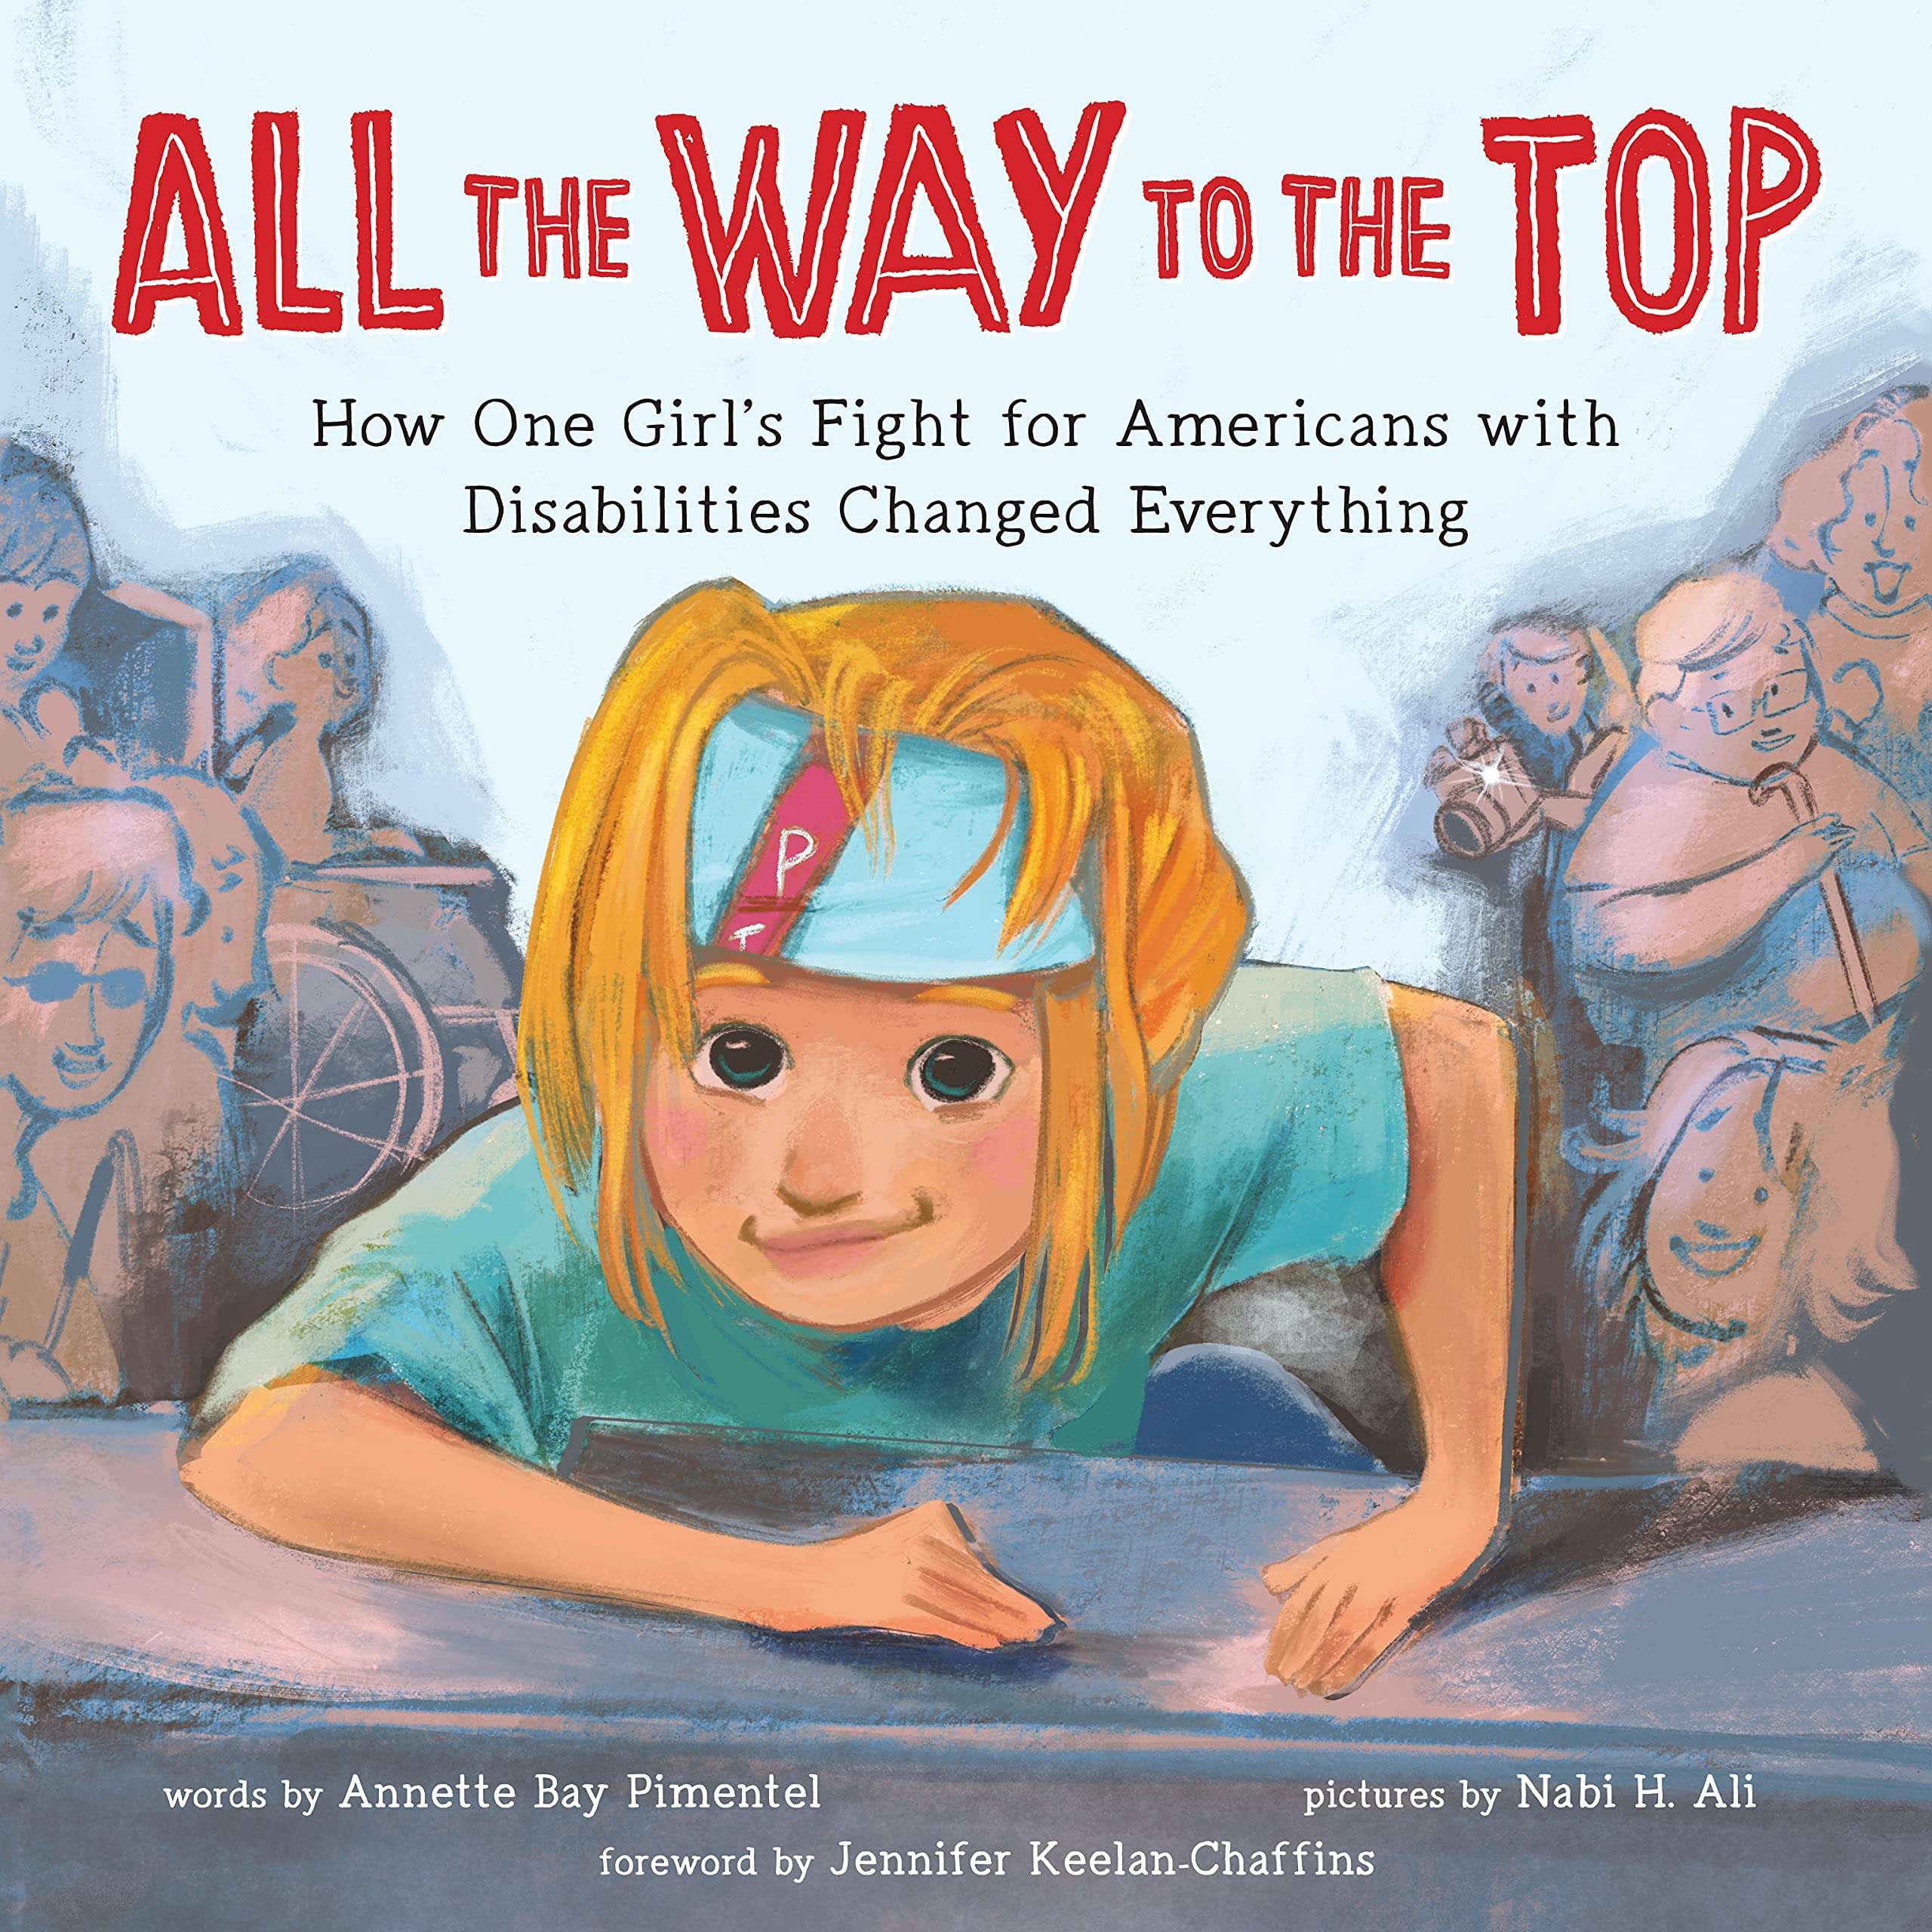 All the Way to the Top: How One Girl’s Fight for Americans with Disabilities Changed Everything by Annette Bay Pimentel